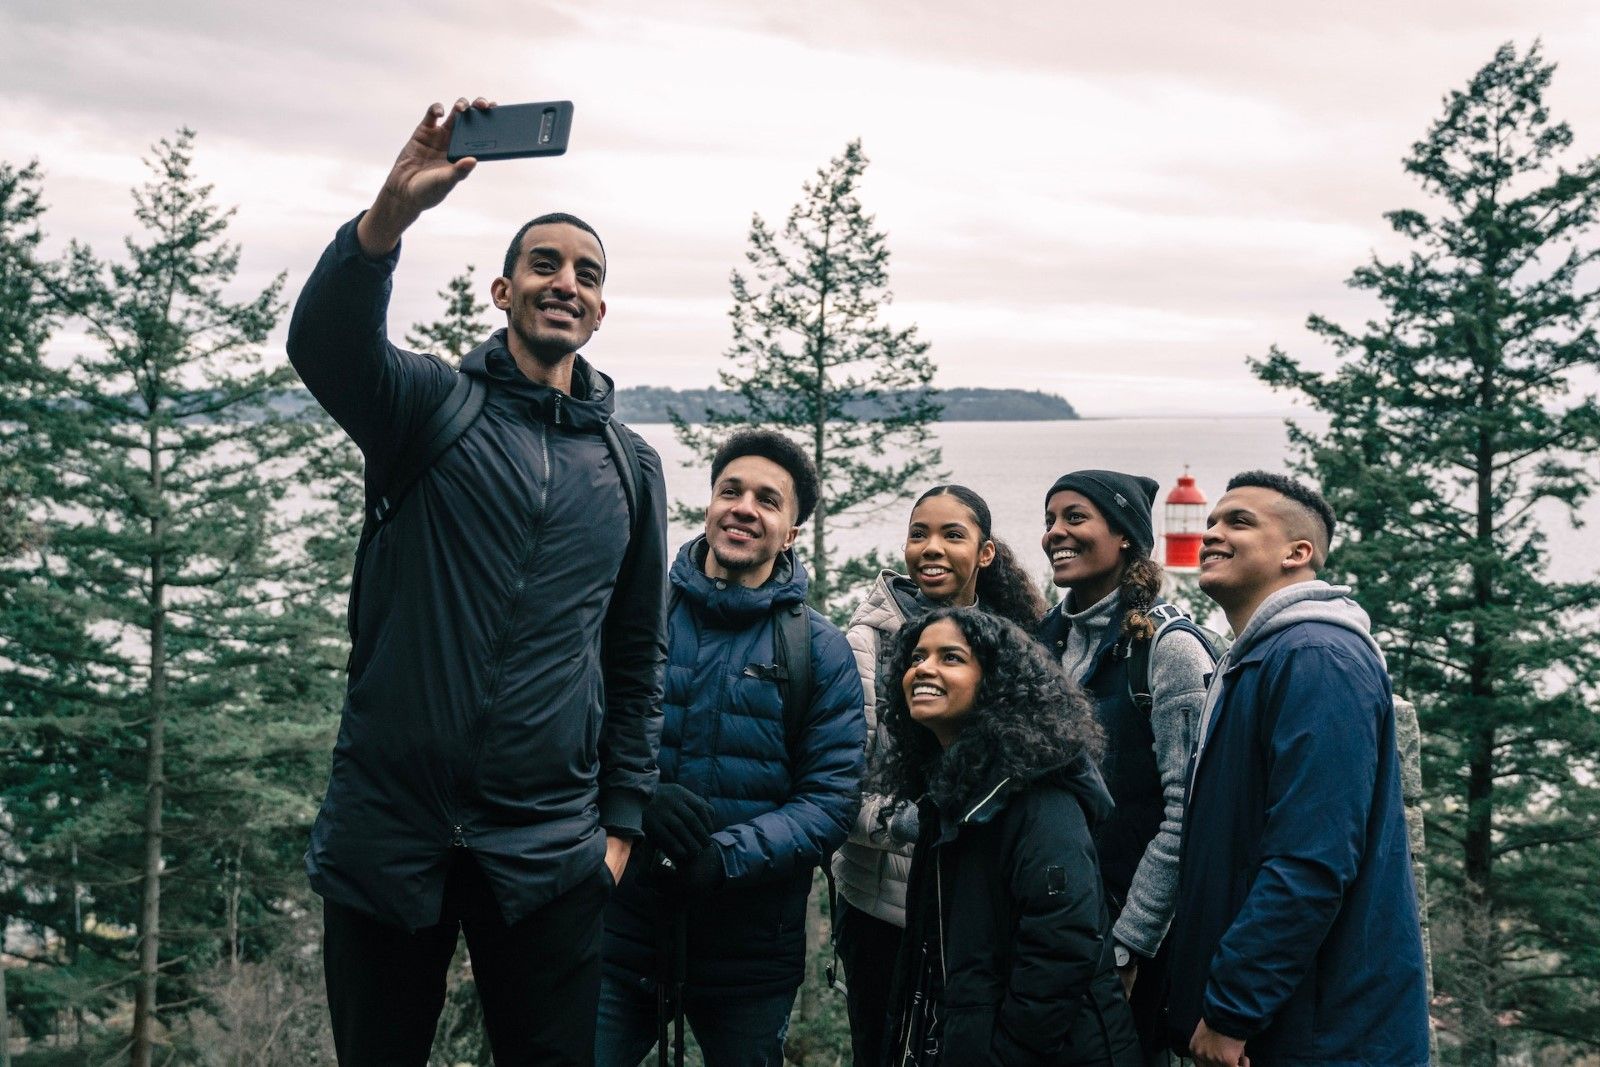 A group of friends taking a selfie at a scenic spot 